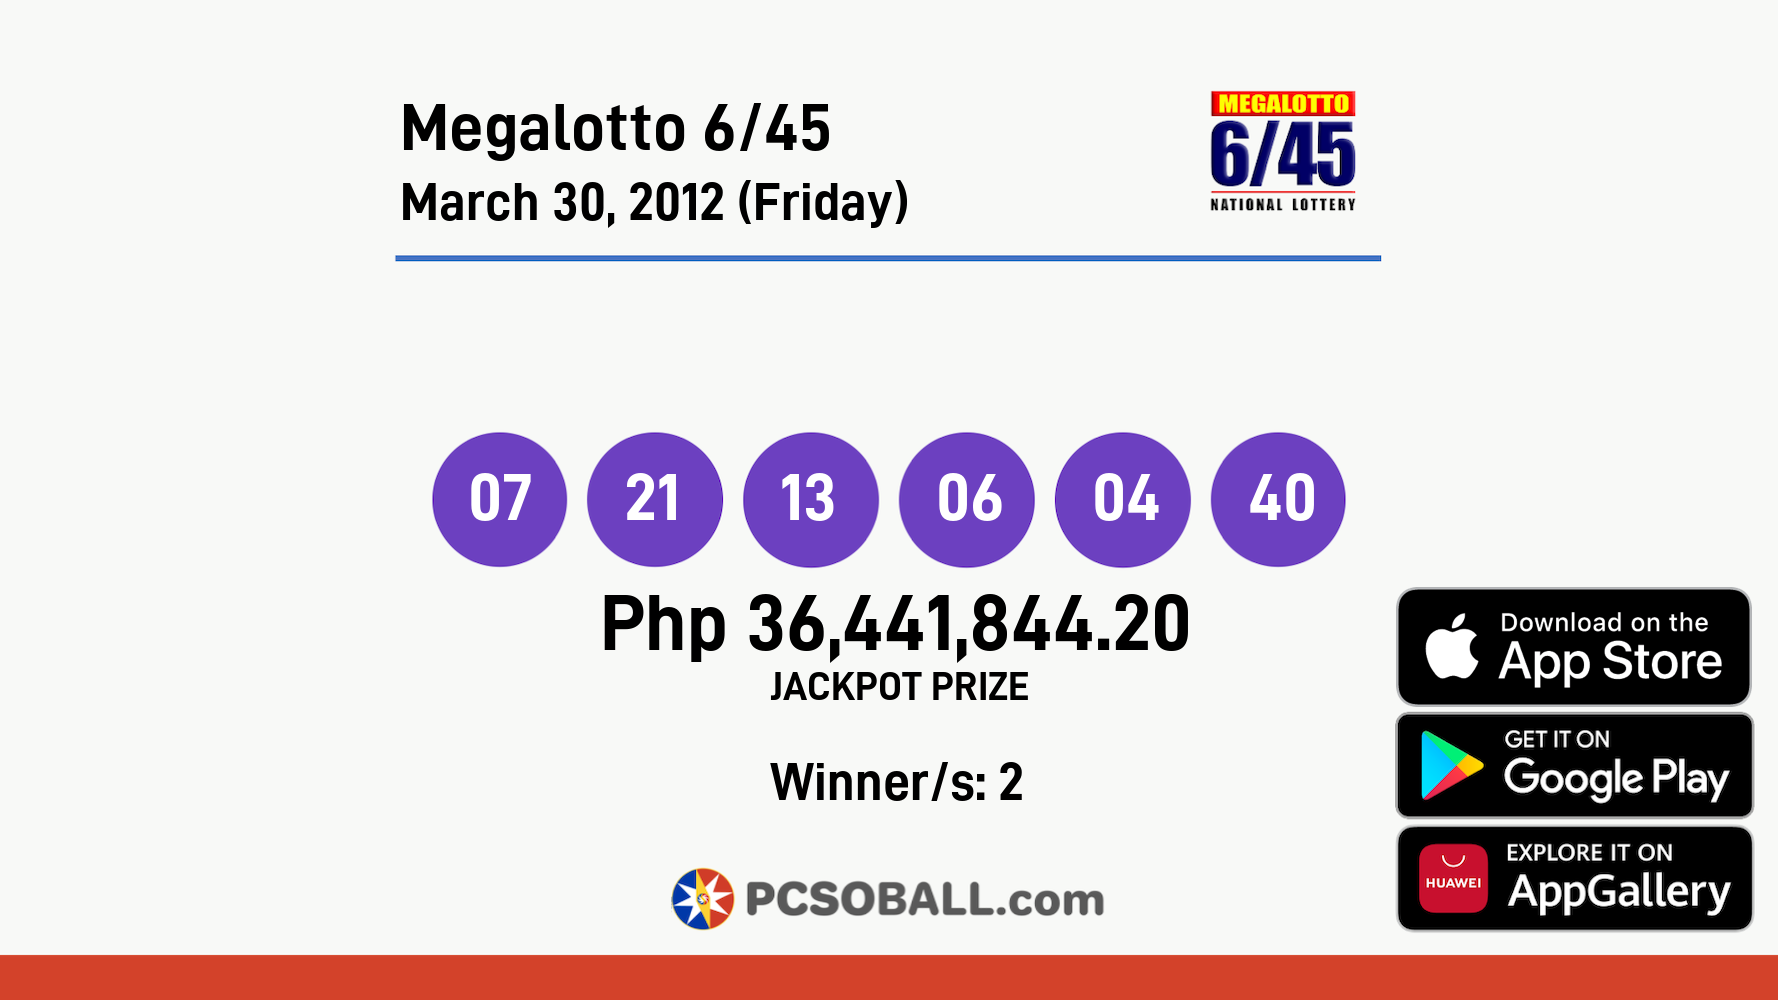 Megalotto 6/45 March 30, 2012 (Friday) Result